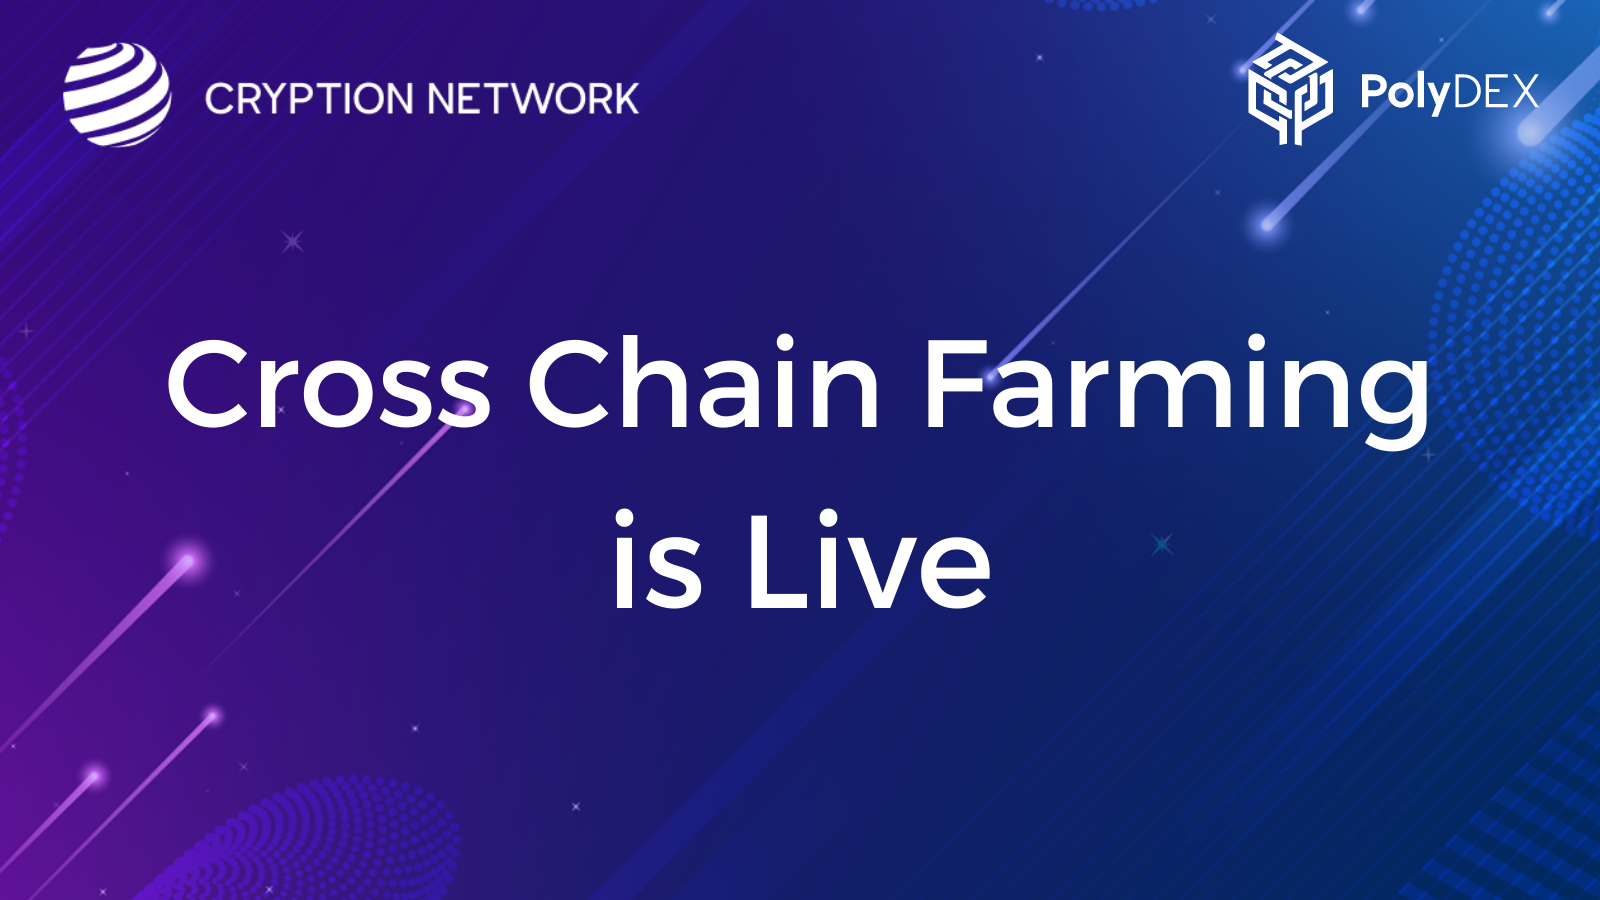 Cryption Network Launches Cross-Chain Farming for PolyDEX